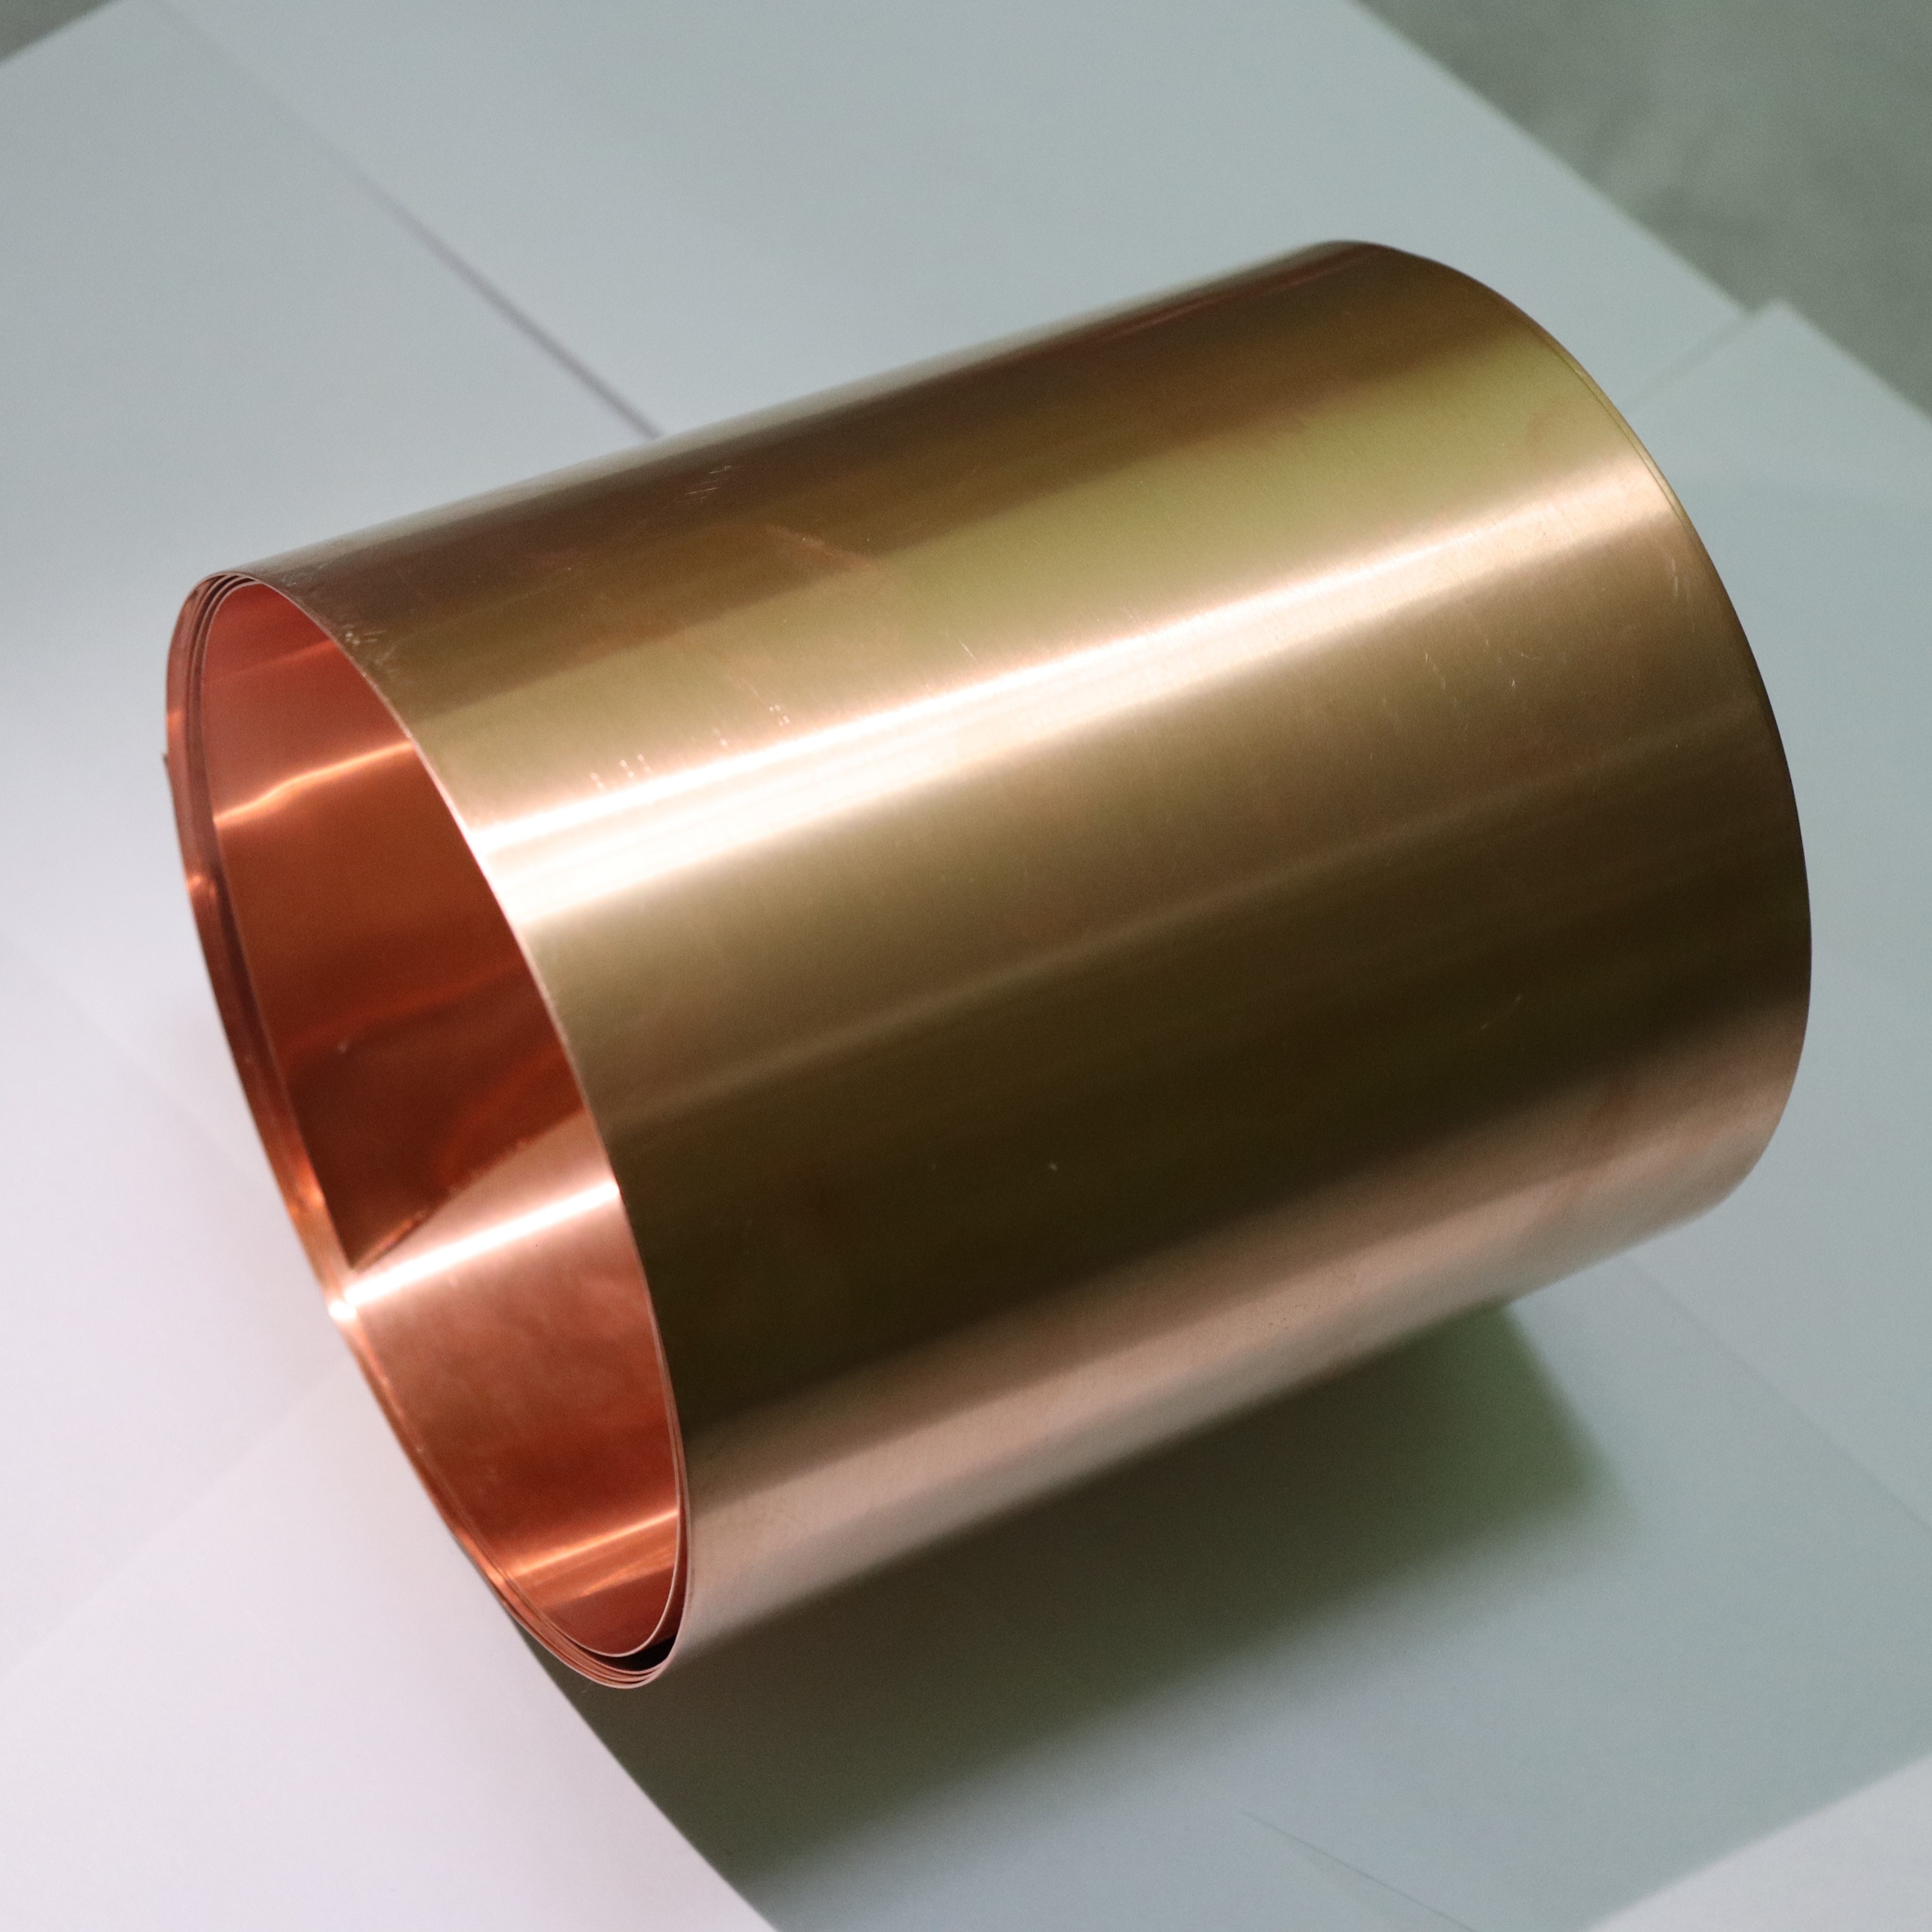 1pc 99.9% Pure Red Copper Flat Metal Plate Thickness 1/1.5/2/3/4/5mm T2 Copper  Strip Copper Plate Diy Material